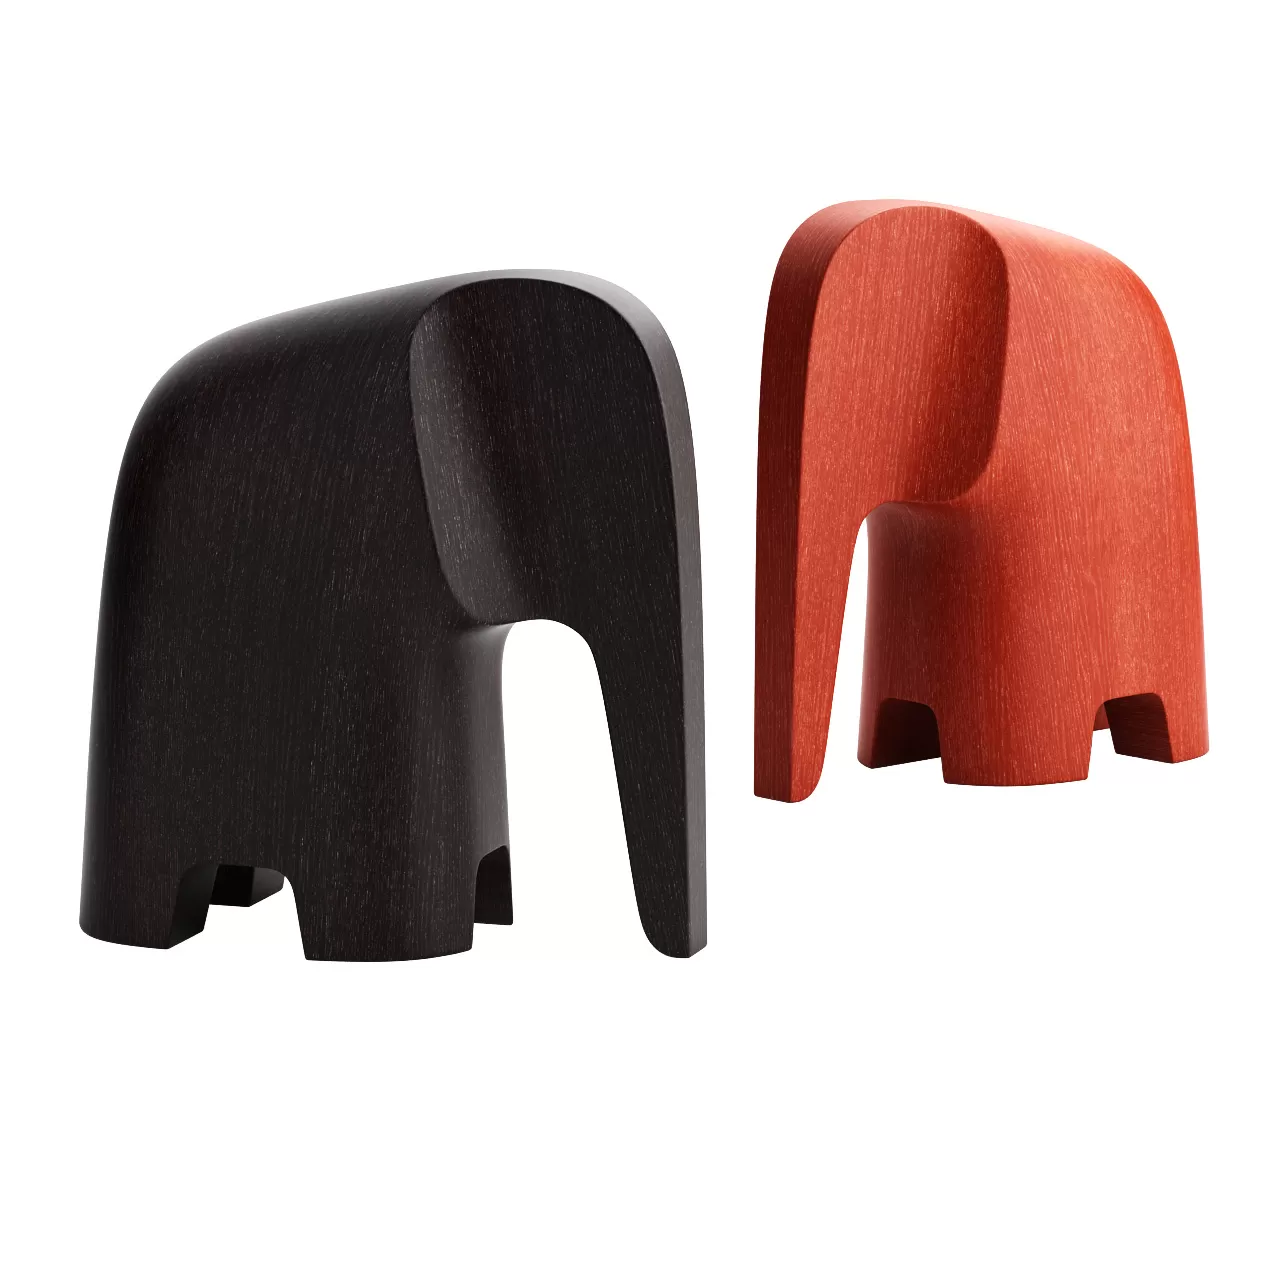 Accessories – olifant-decorative-object-by-caussa